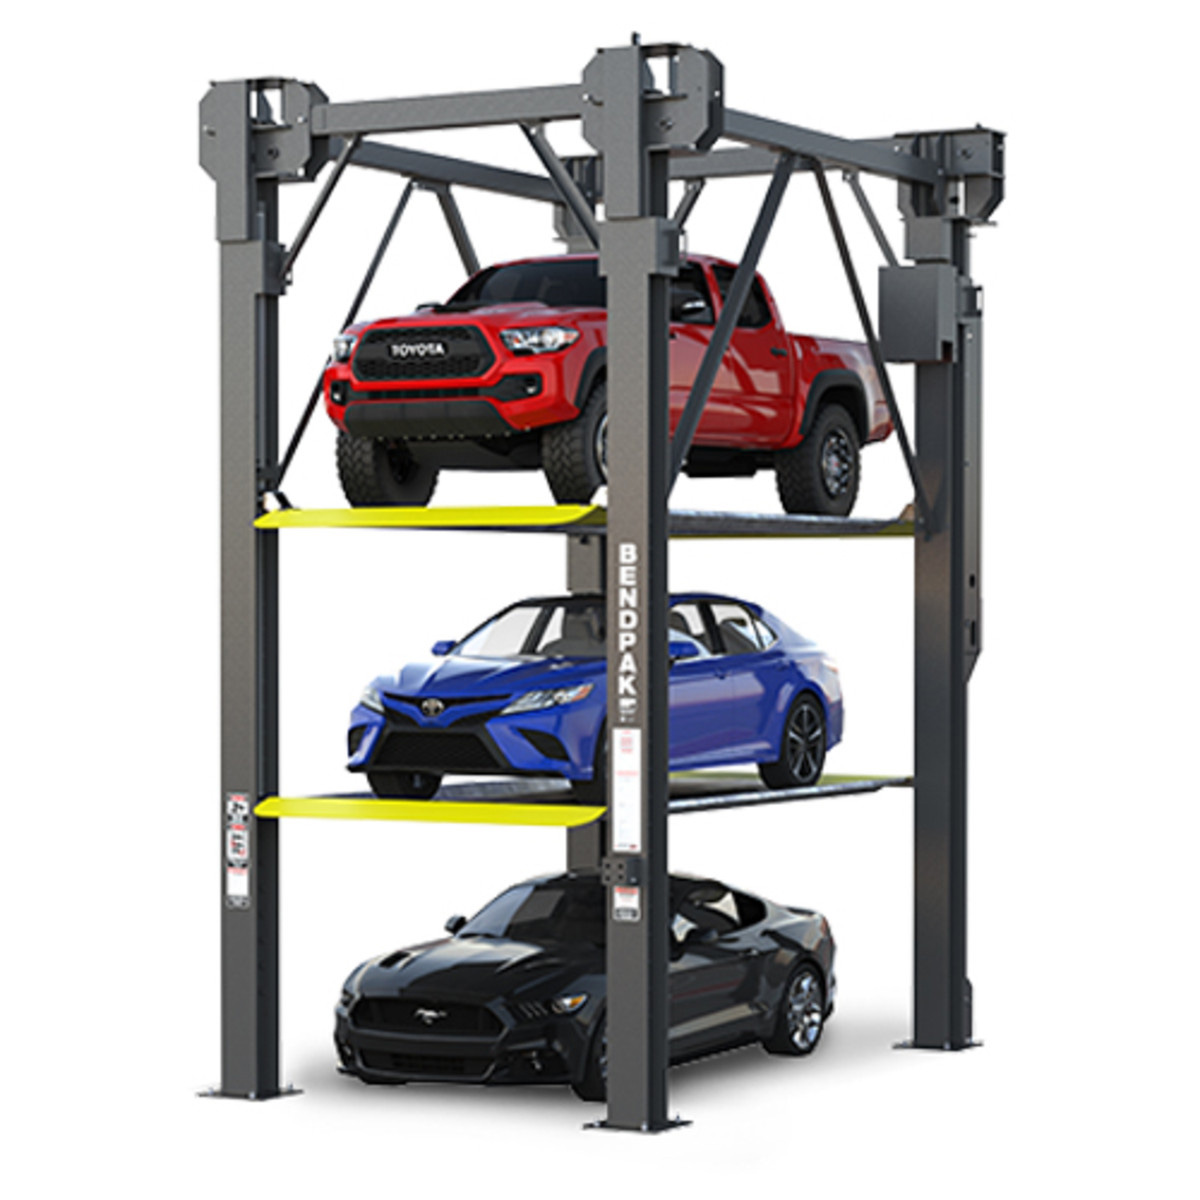 Parking Lifts from Babco